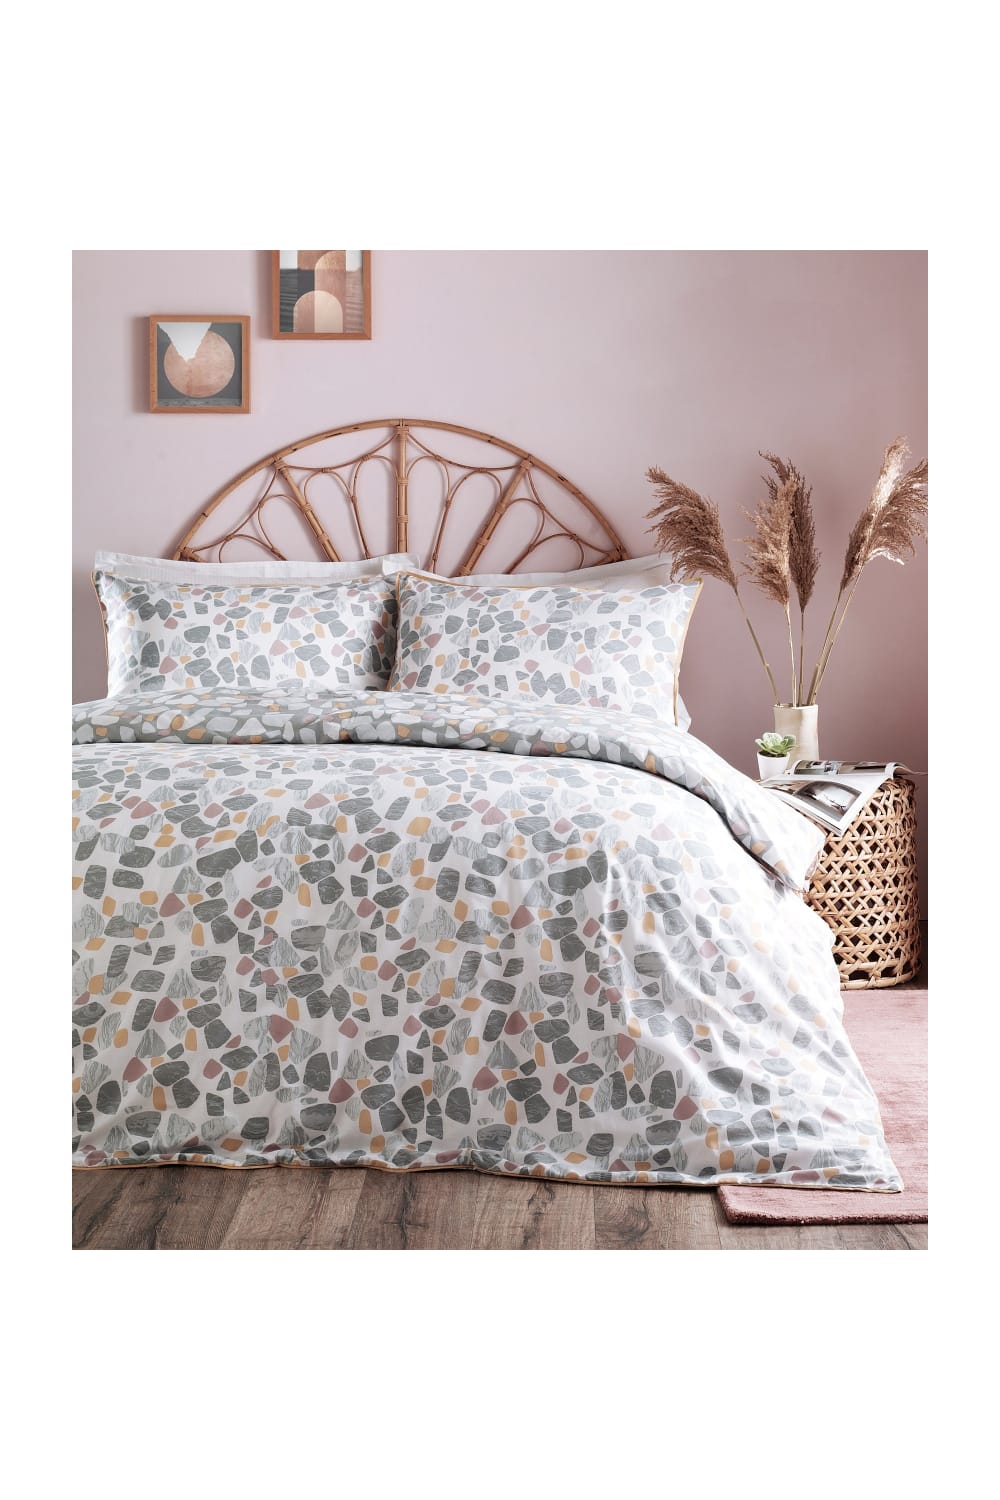 Furn Terrazo Duvet Cover Set With Marble Stone Print Design (Gray/Blush Pink/Ochre) (Super King)